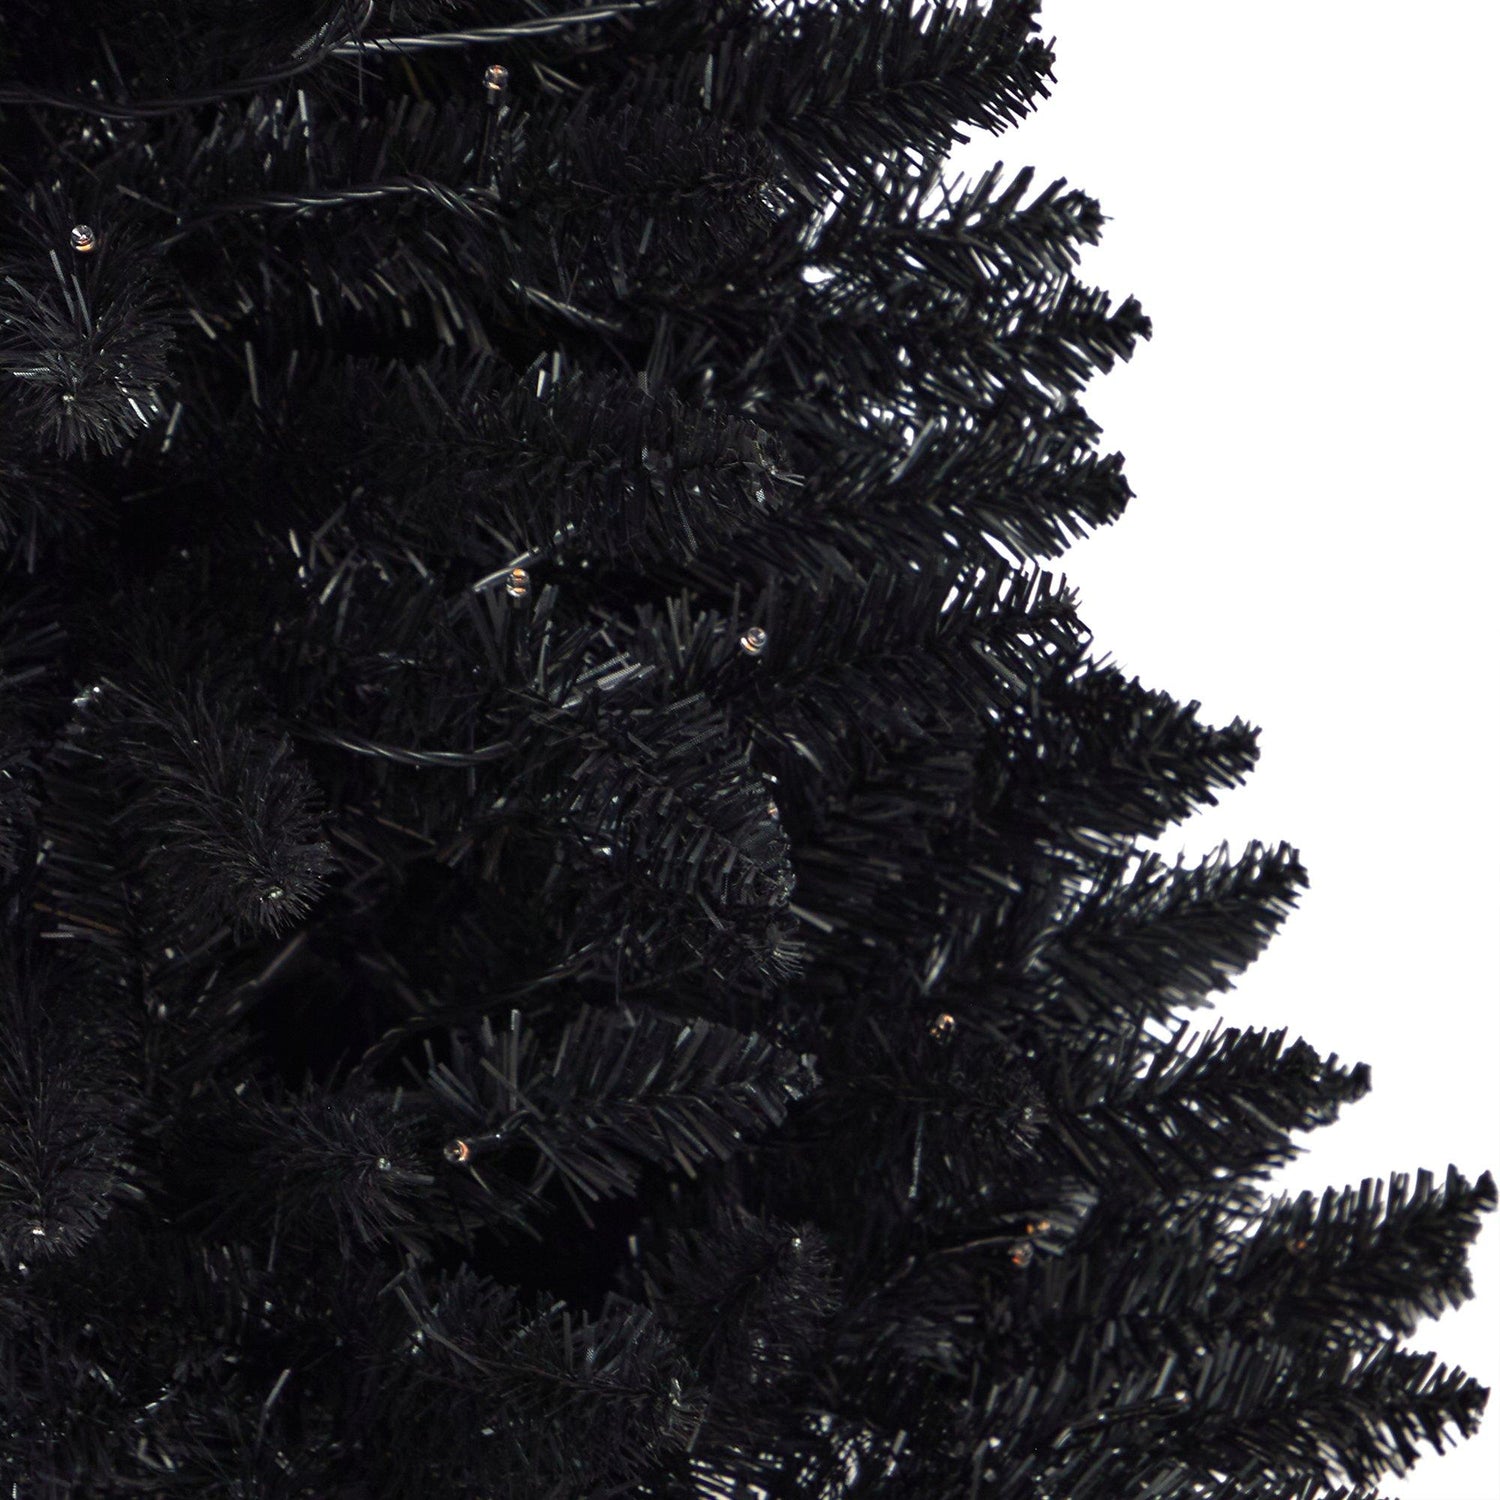 4’ Black Halloween Artificial Christmas Tree in Urn with 100 Orange LED Lights